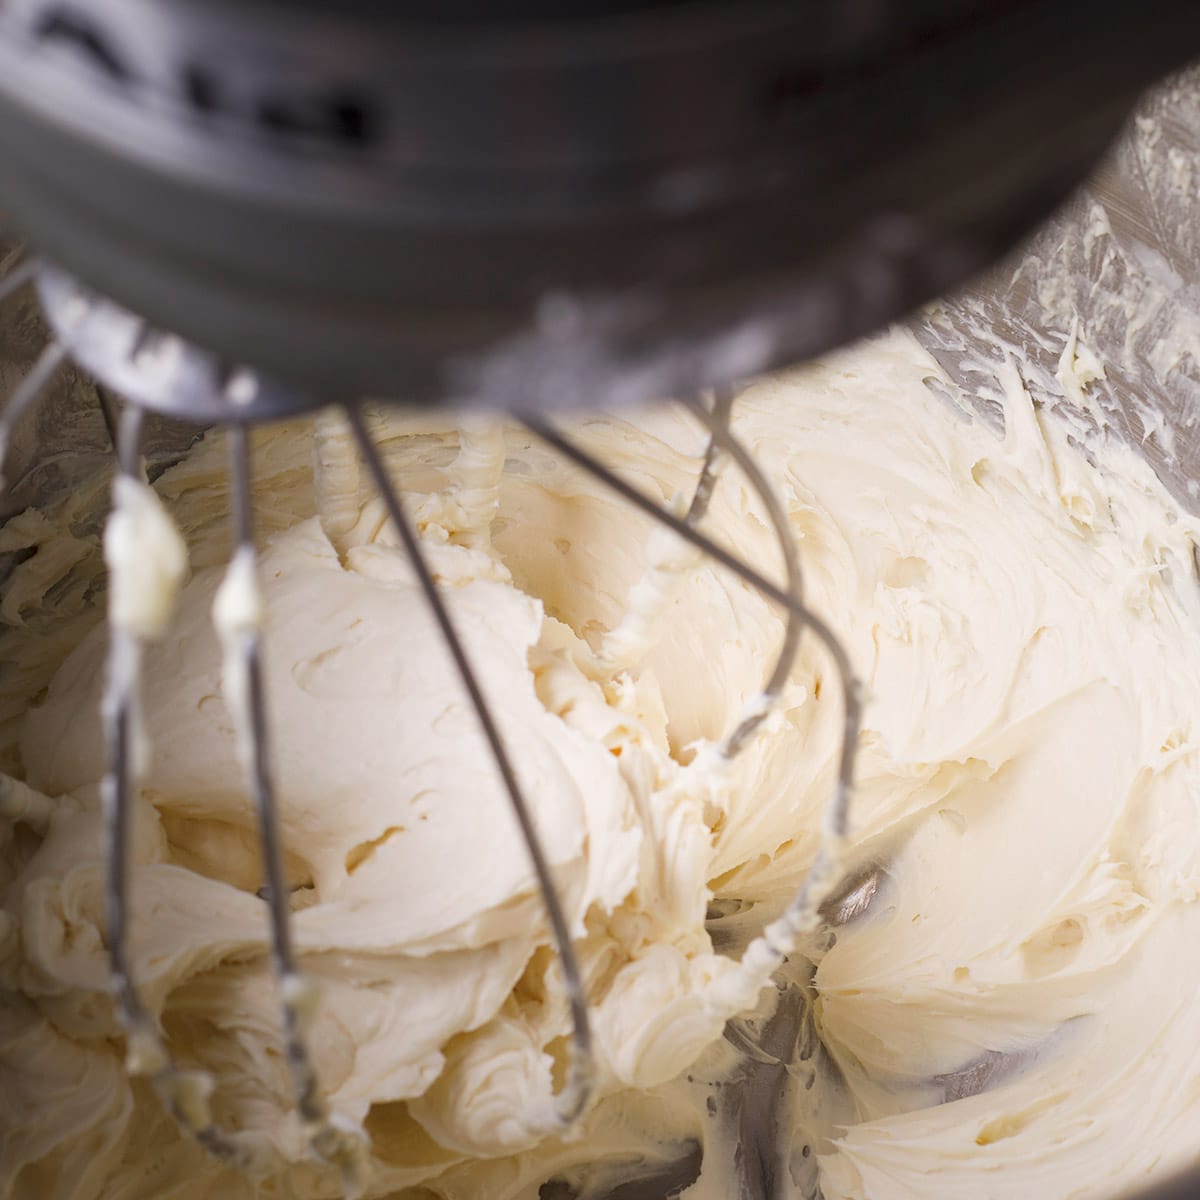 Using an electric mixer to beat cream cheese, butter, salt, and vanilla.